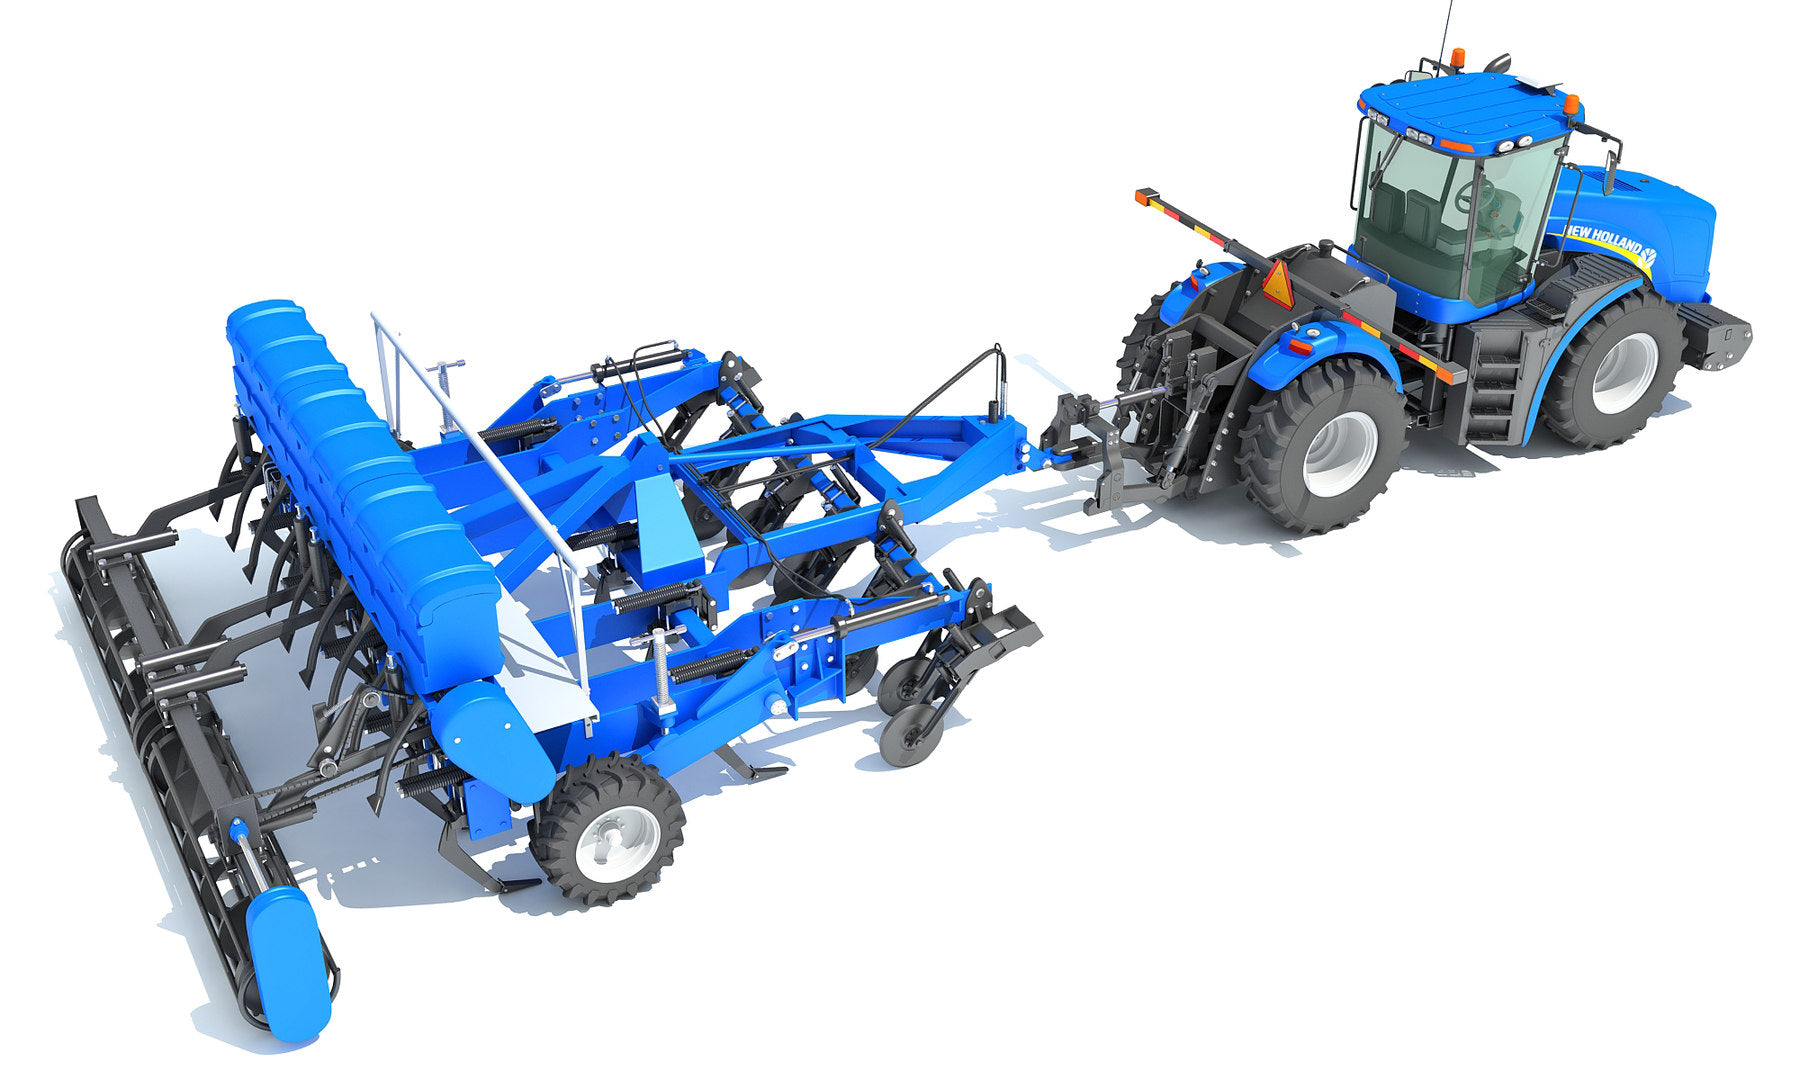 New Holland Tractor Model